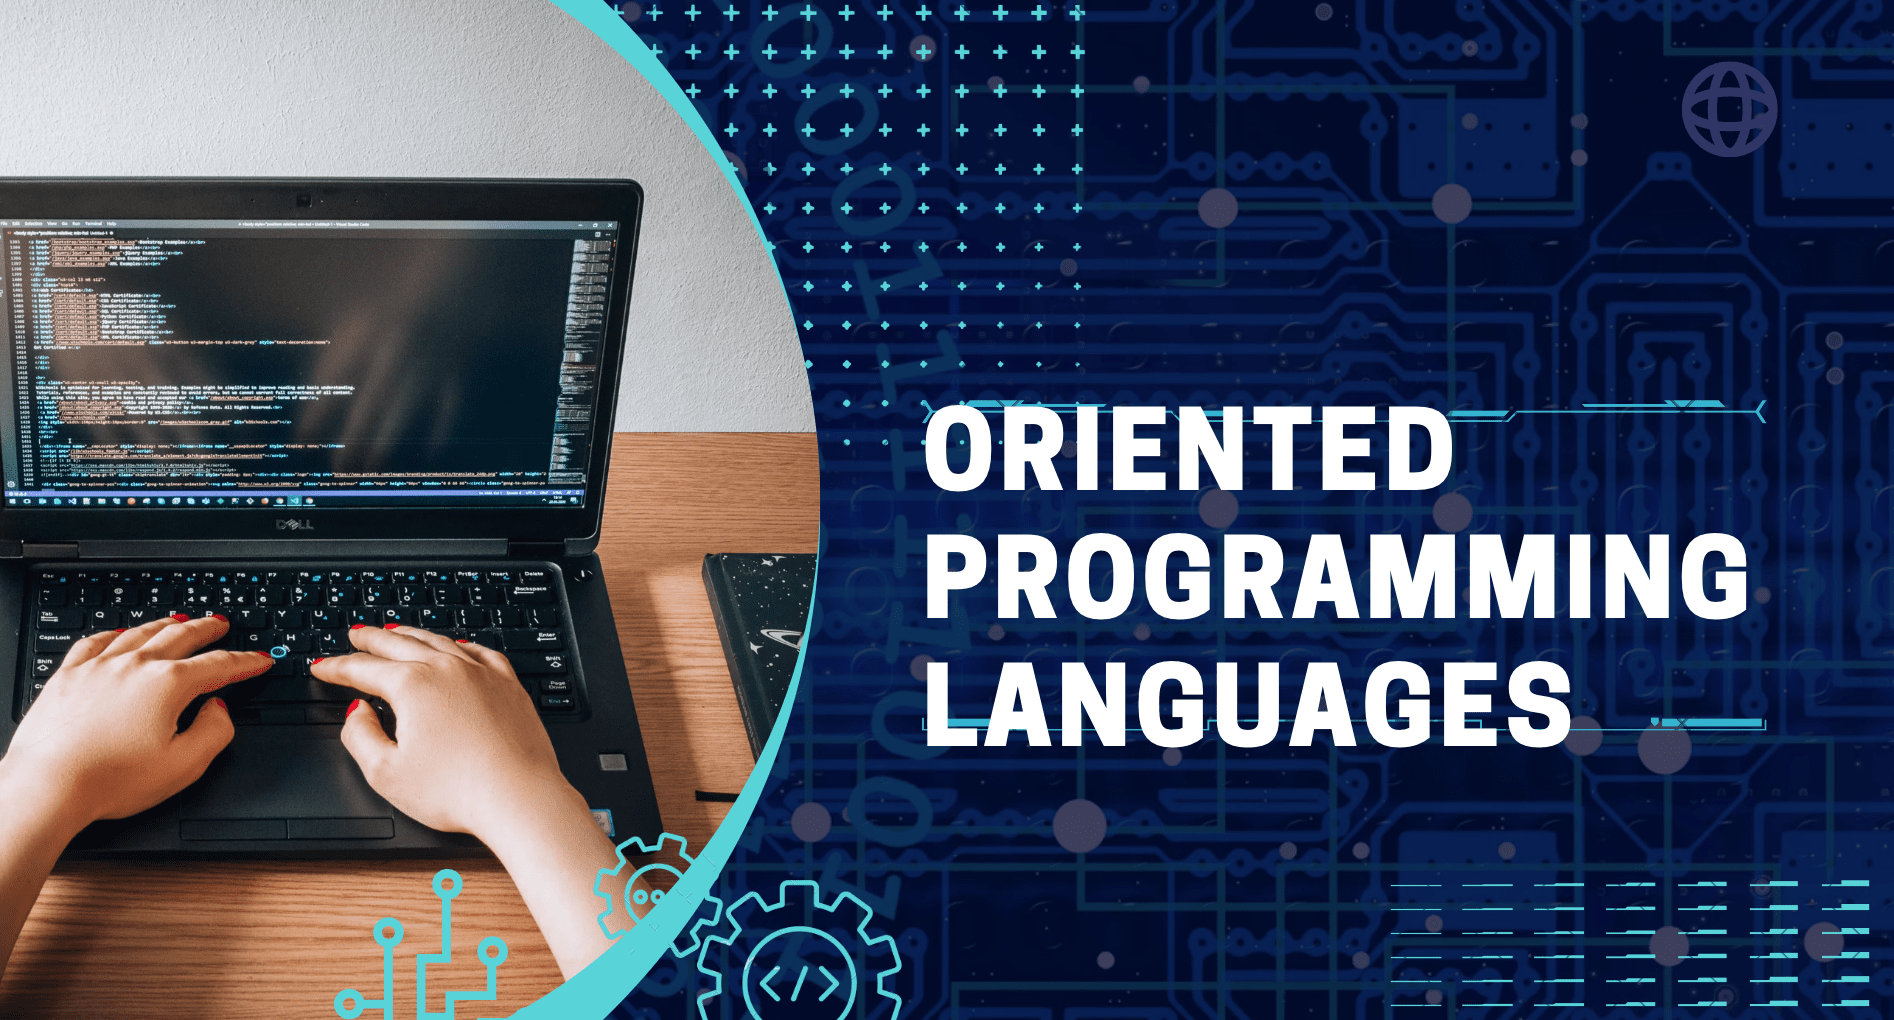 What Are Object Oriented Programming Languages?